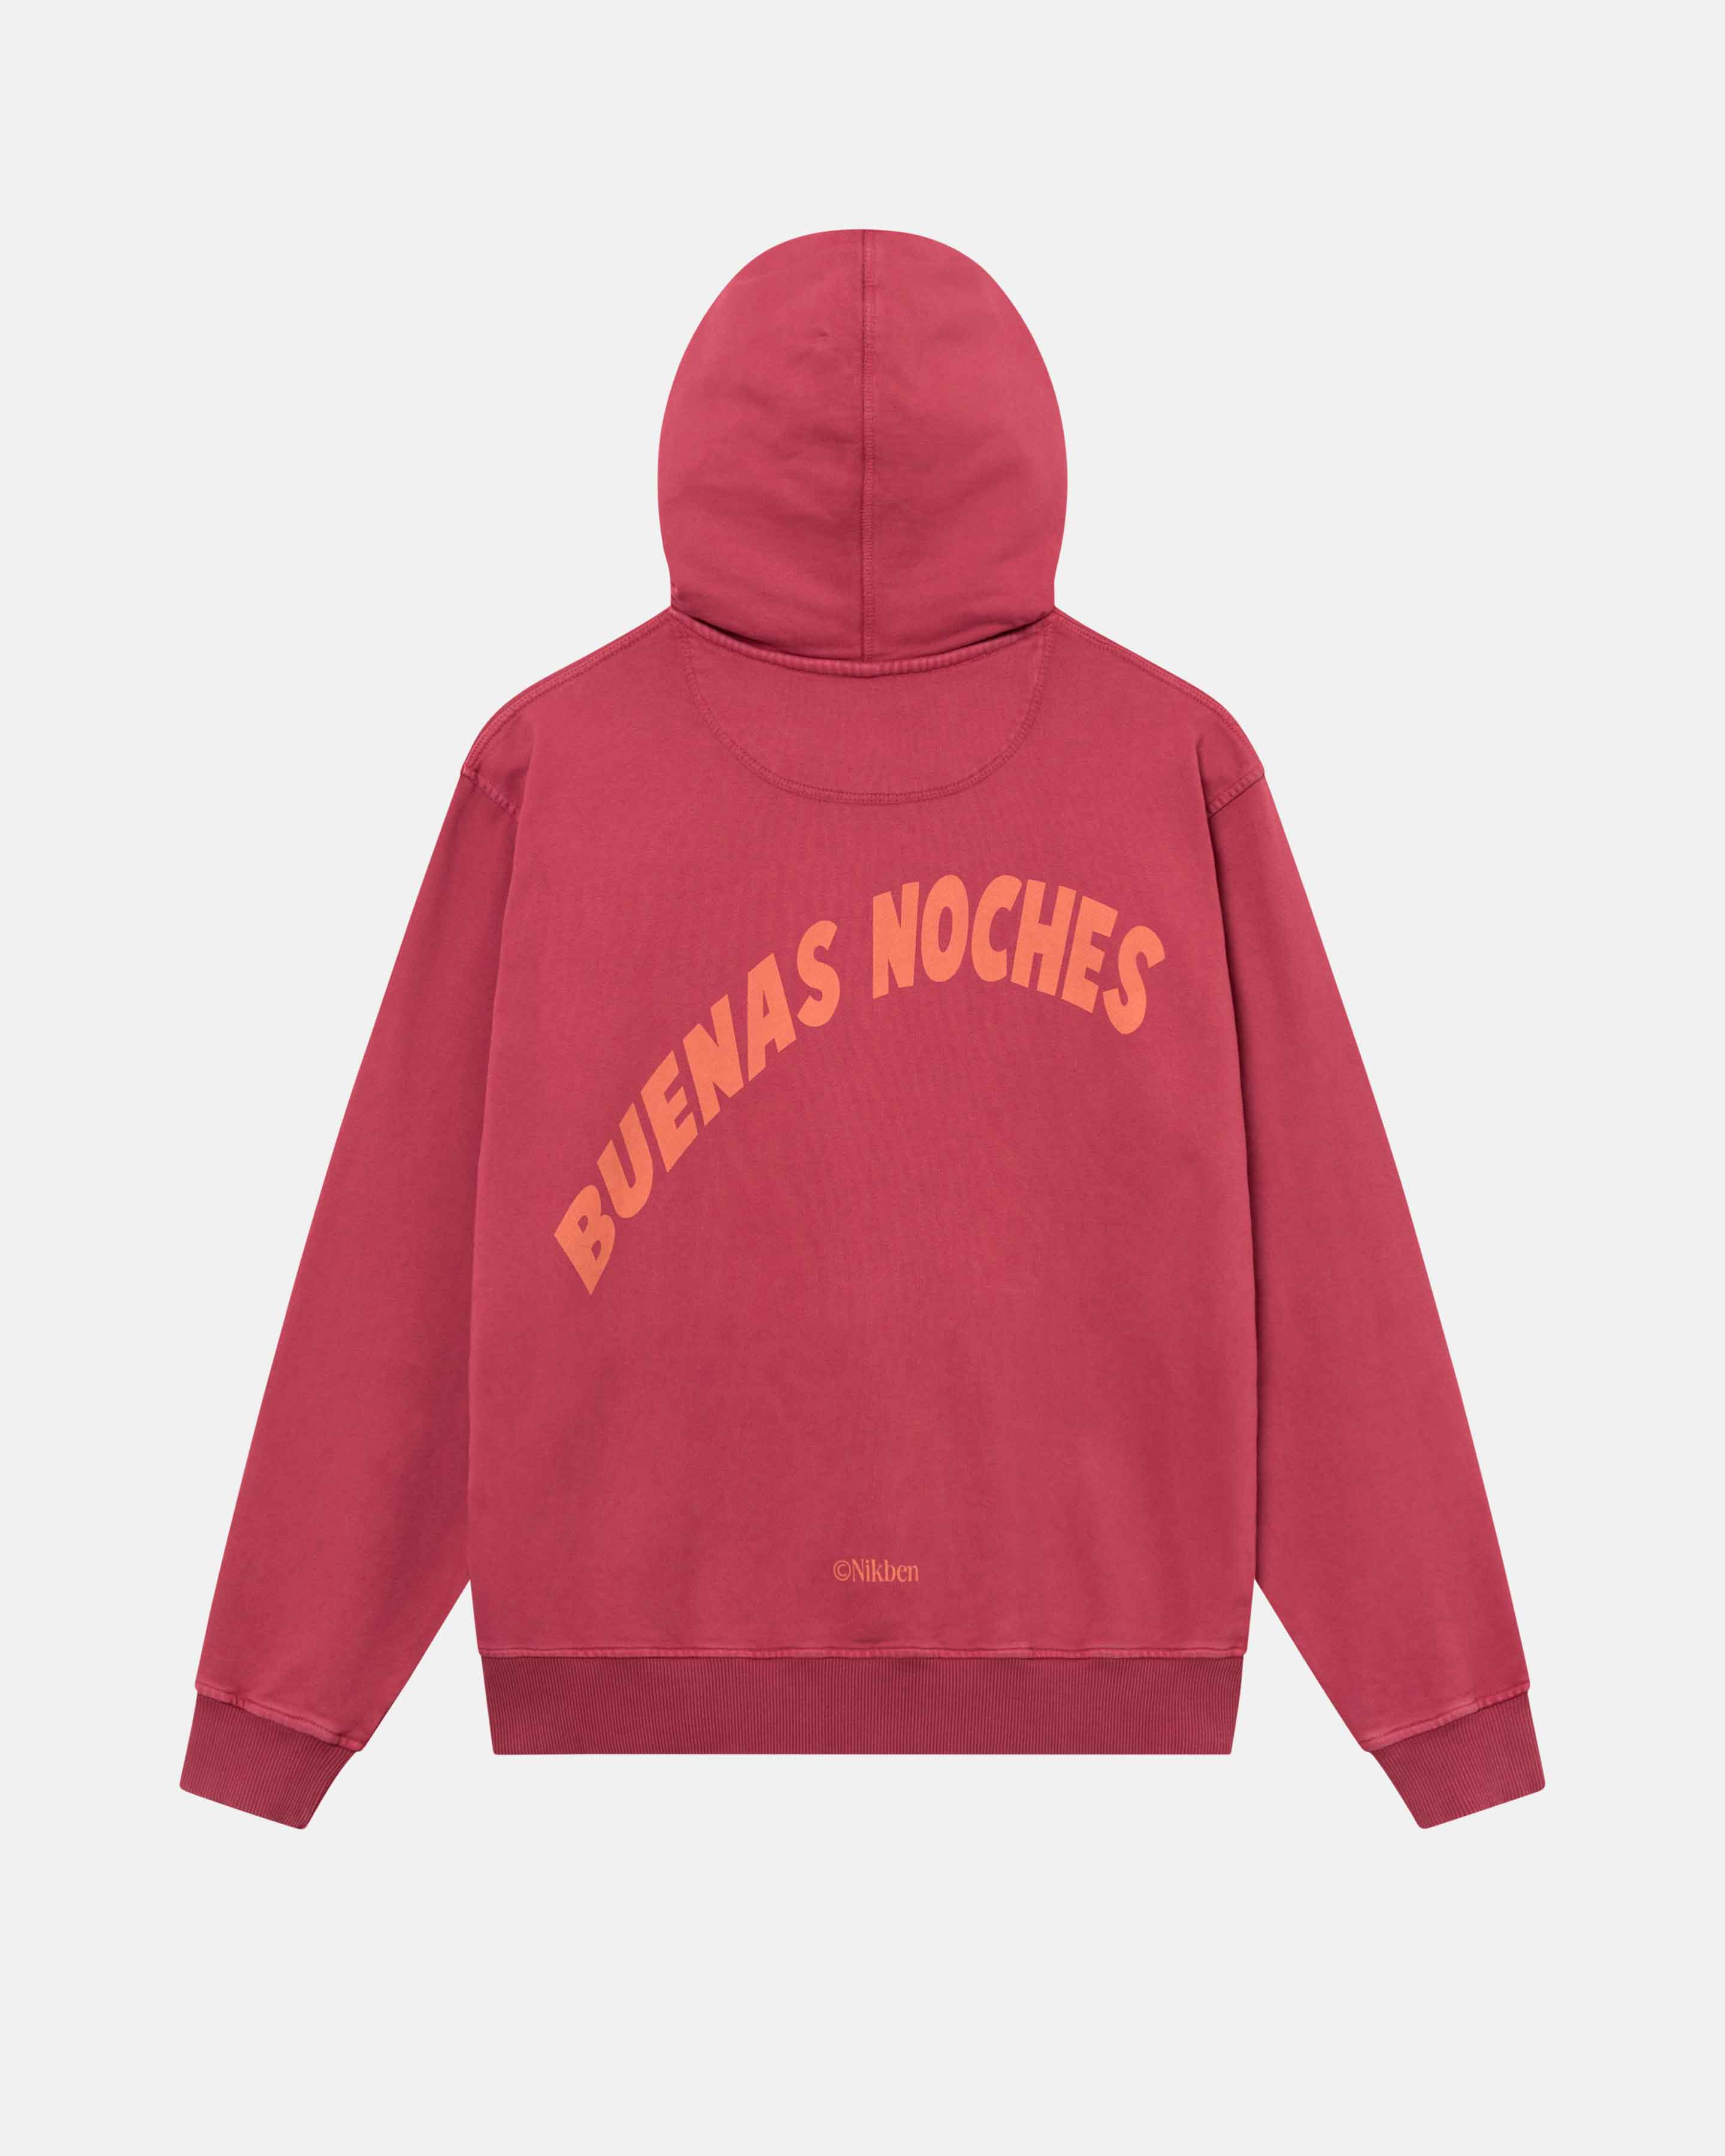 A burgundy hoodie with a large orange 